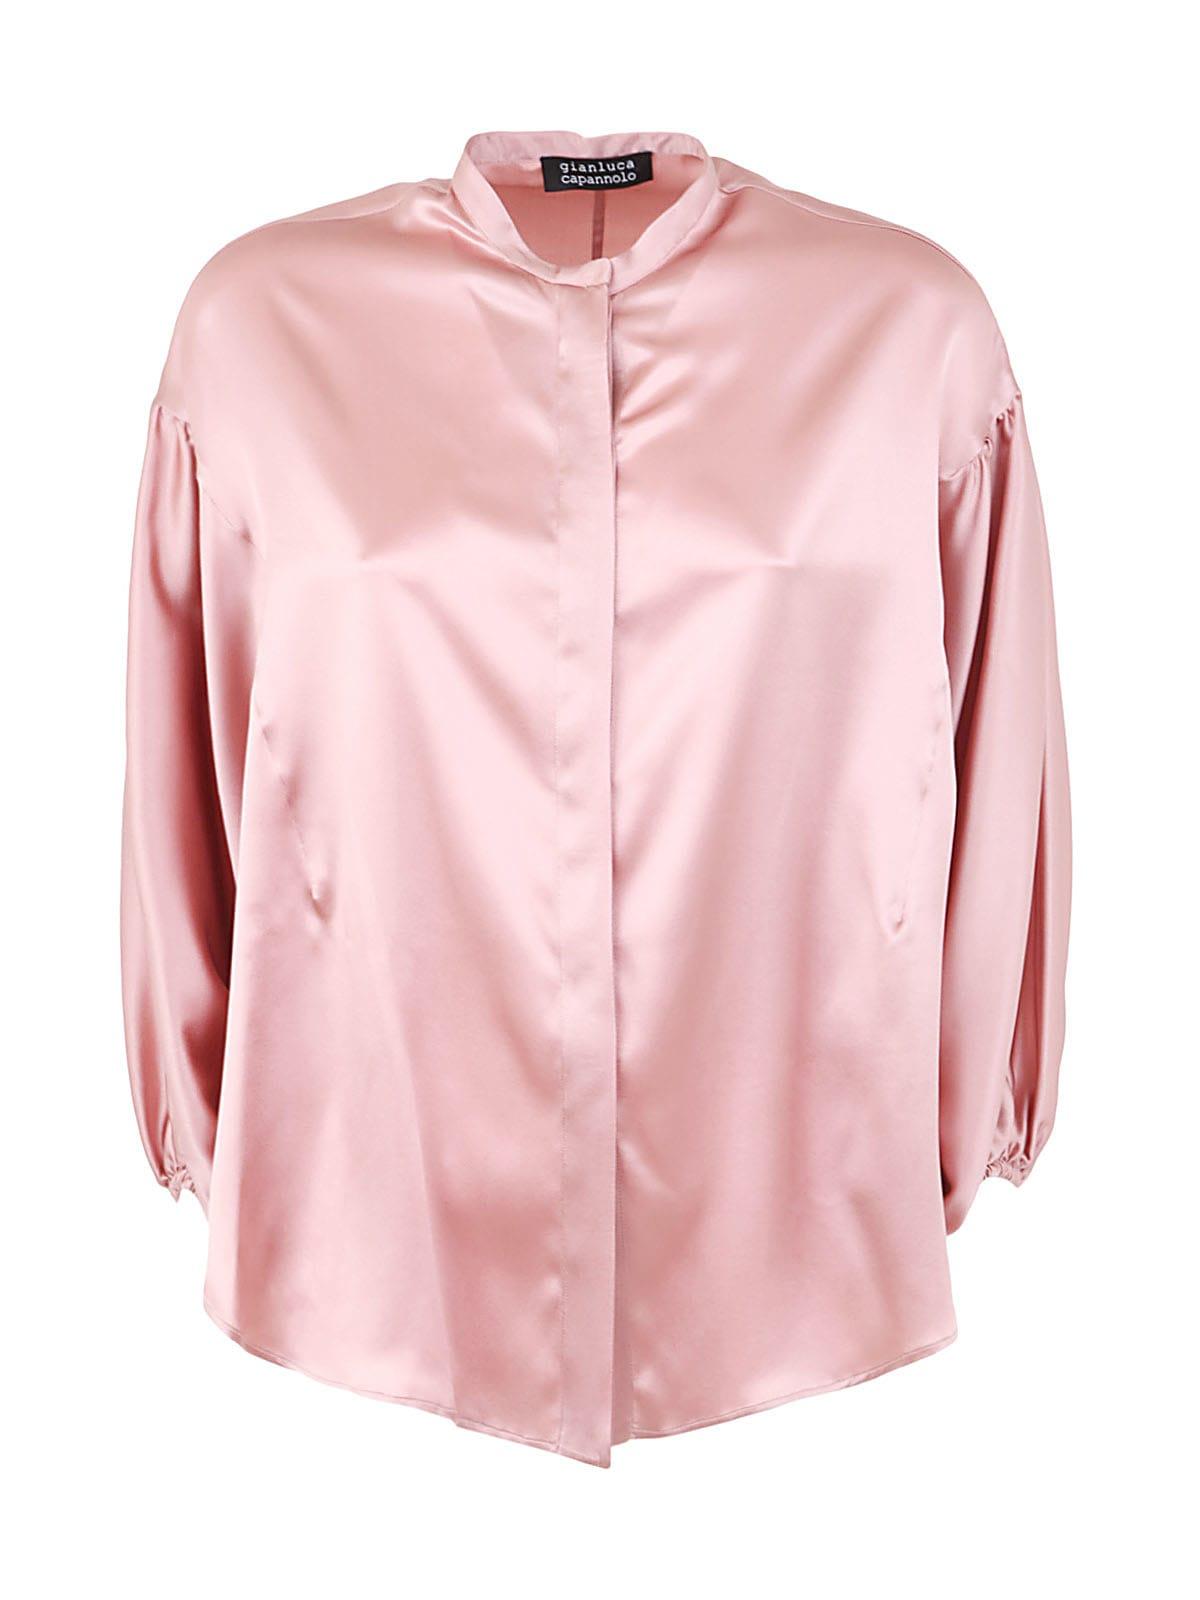 Gianluca Capannolo Lola Shirt in Pink | Lyst